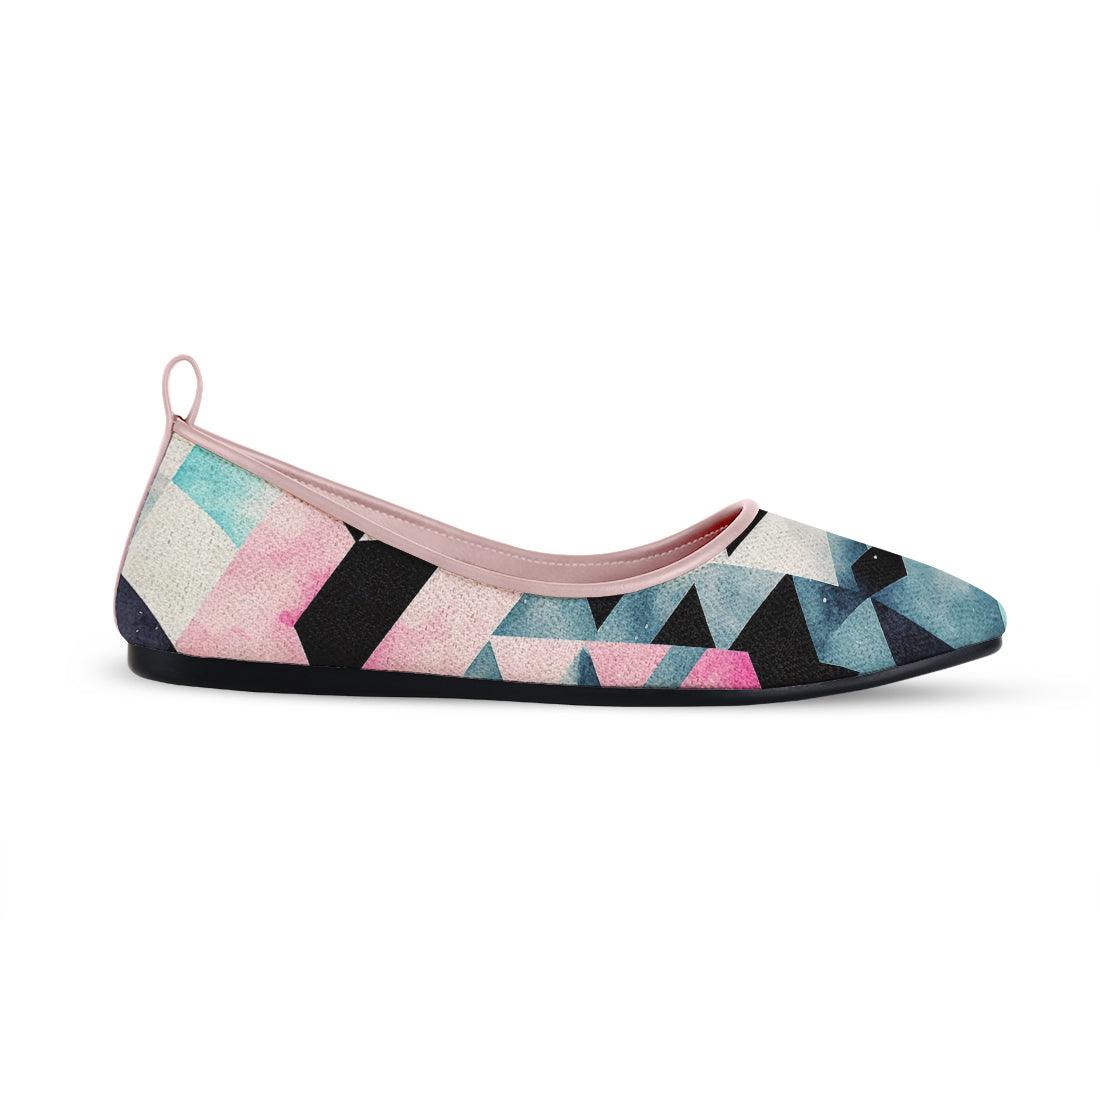 Rose Round Toe Shoe Colorful Patterns - CANVAEGYPT